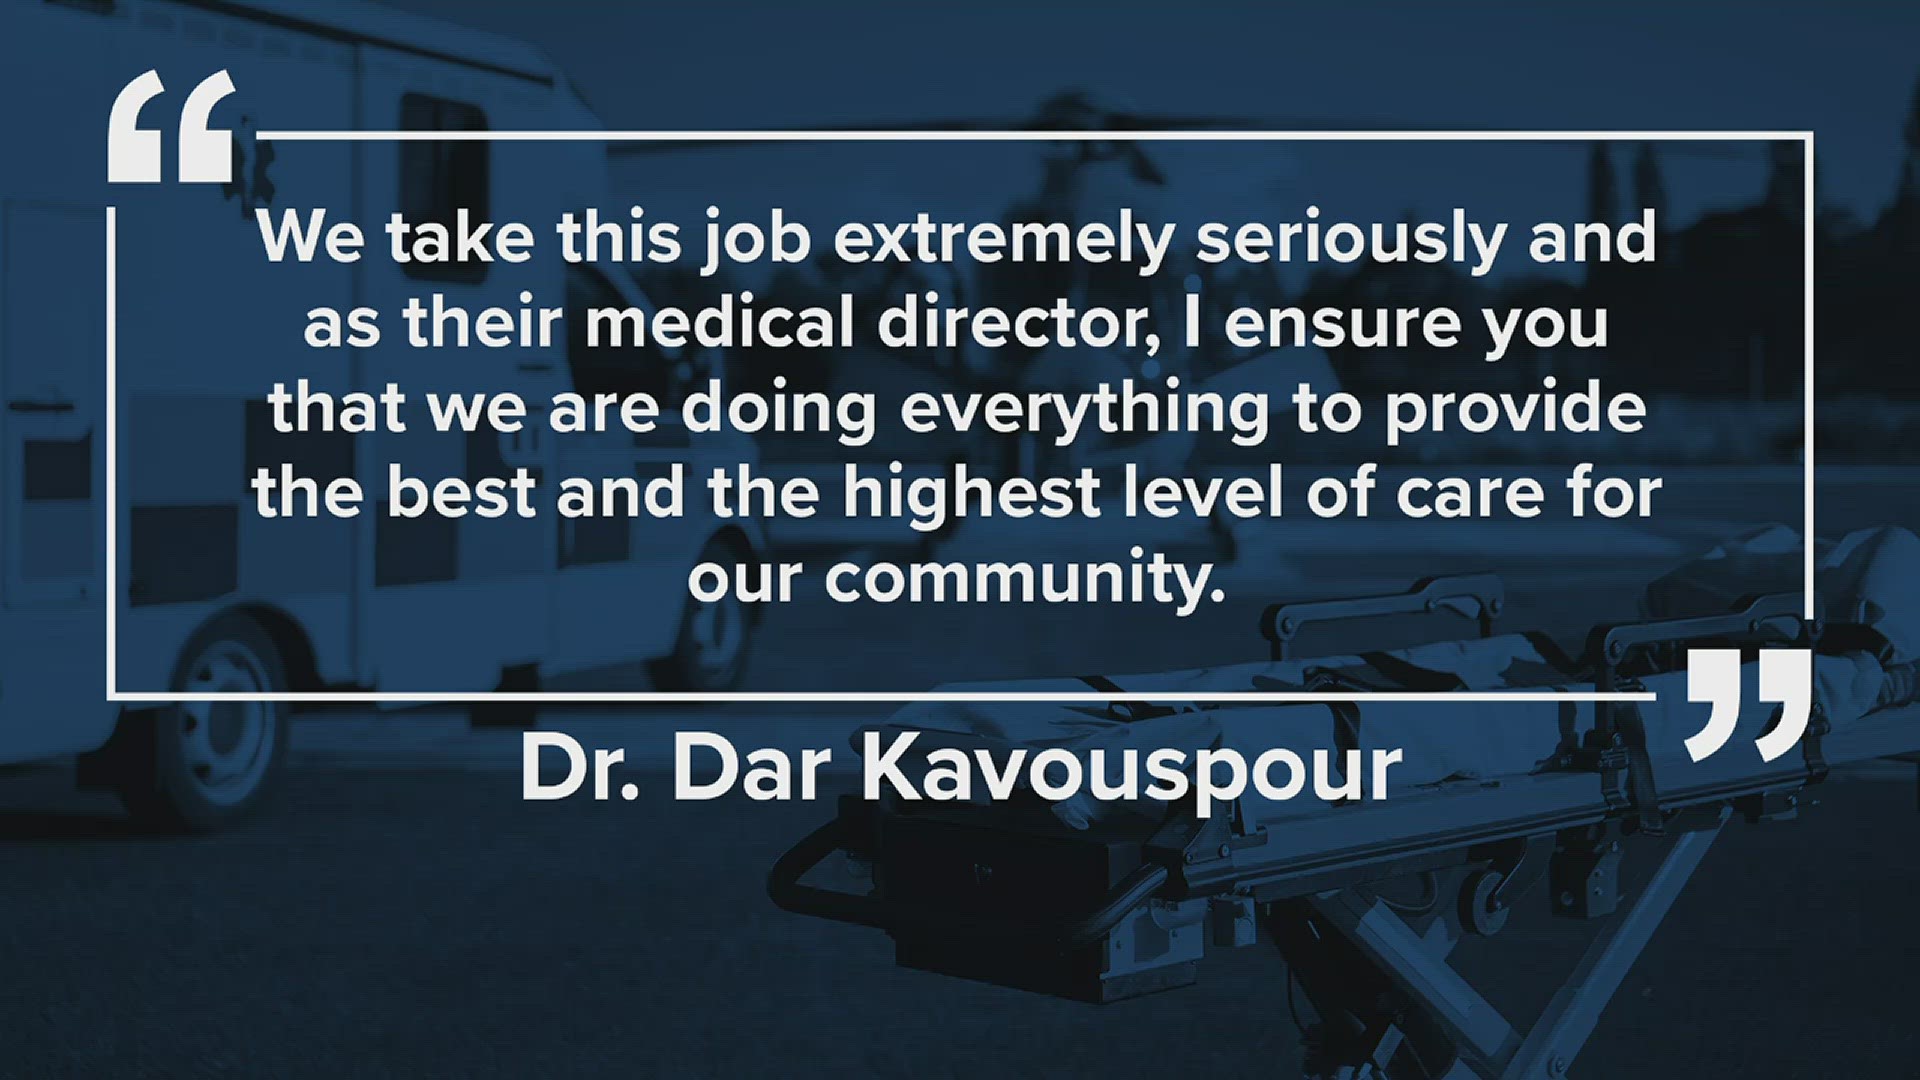 Dr. Dar Kavouspour has been the medical director of Beaumont EMS since 2004. He says current response times are "excellent".